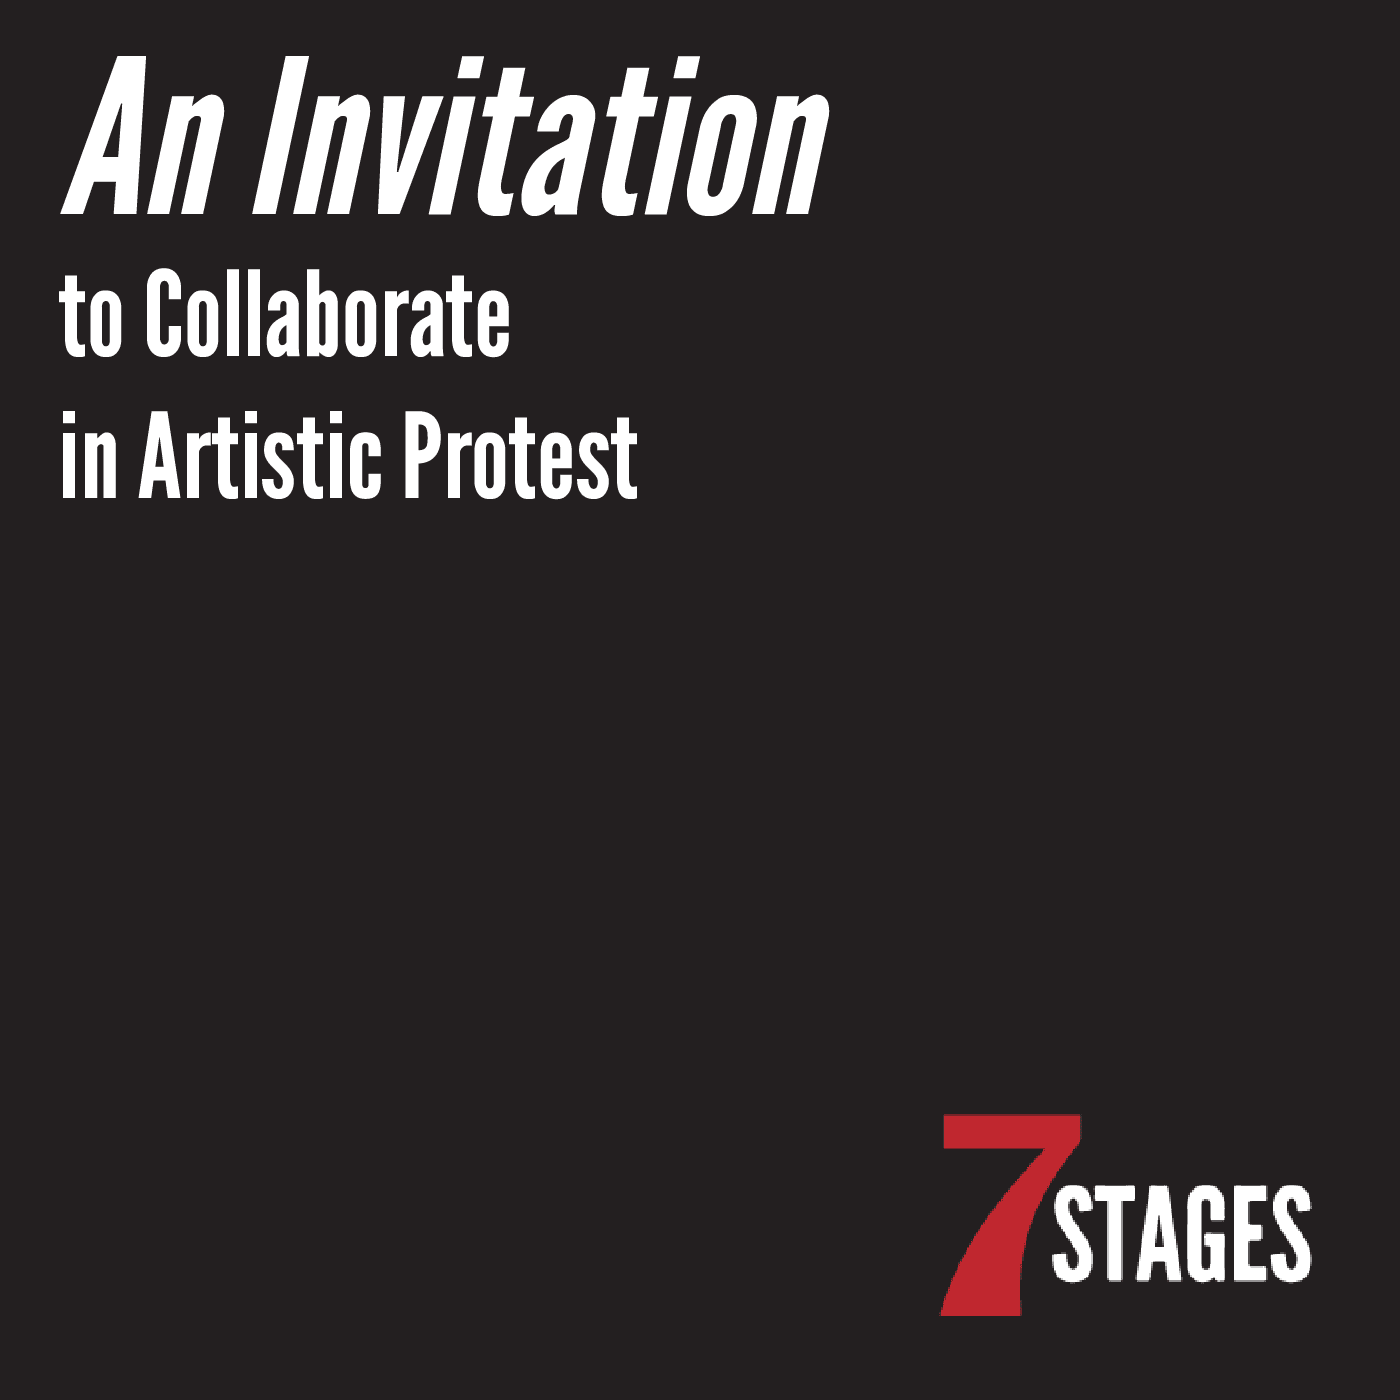 An Invitation to Collaborate in Artistic Protest. 7 Stages.